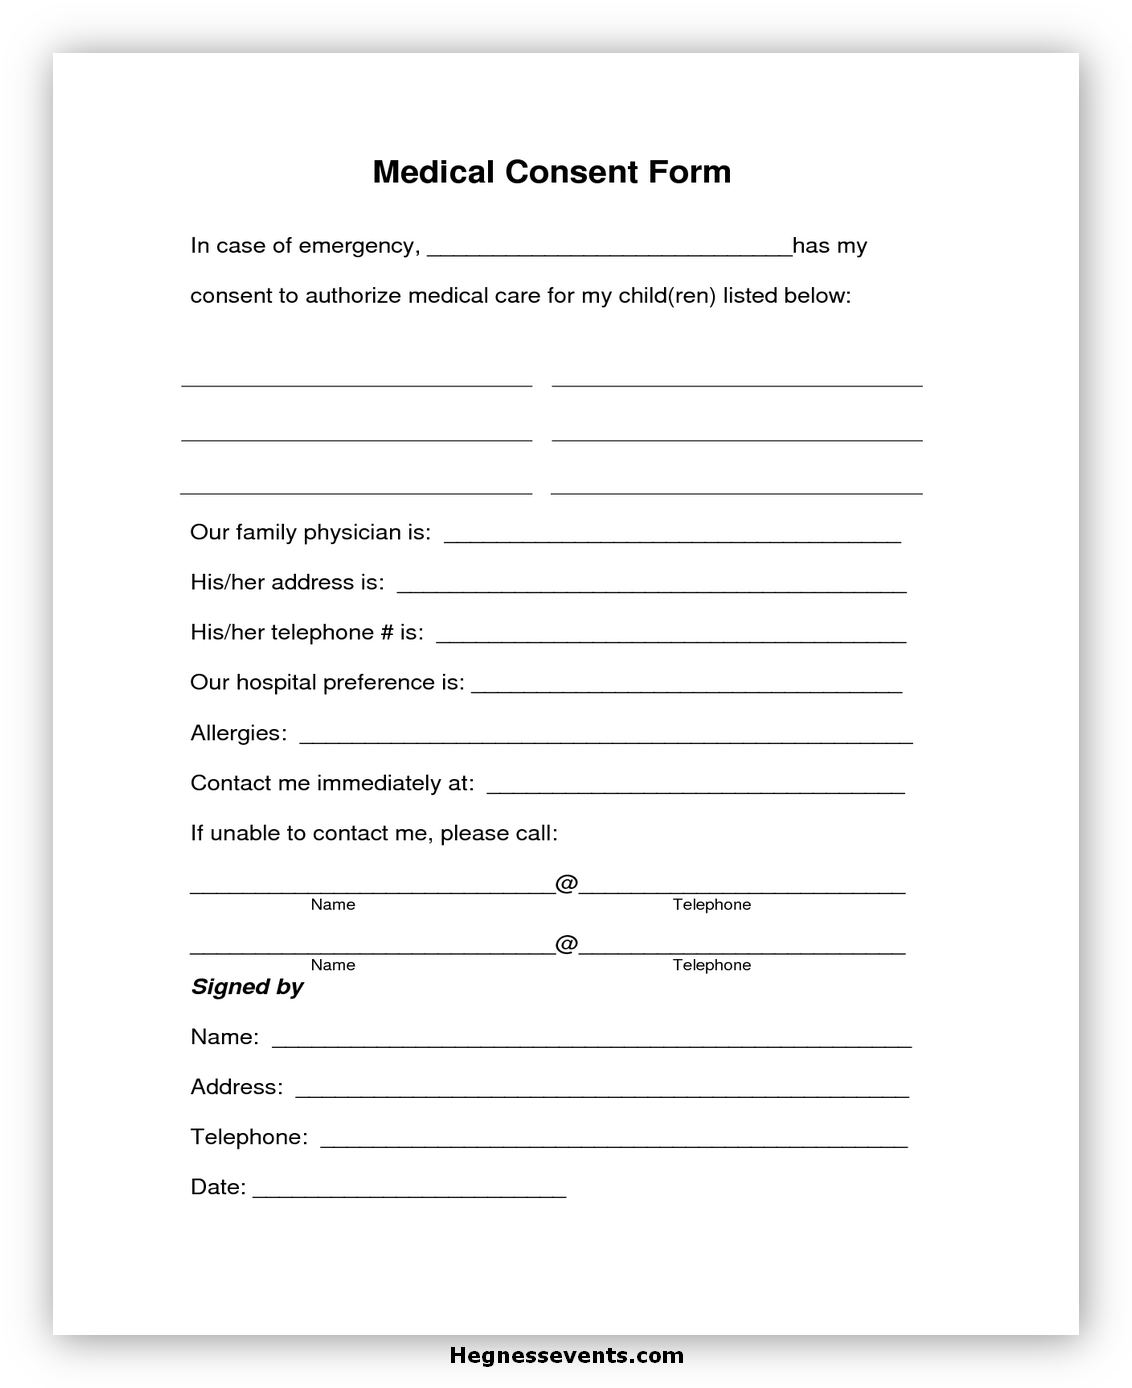 Child Medical Consent Form Notarized 3